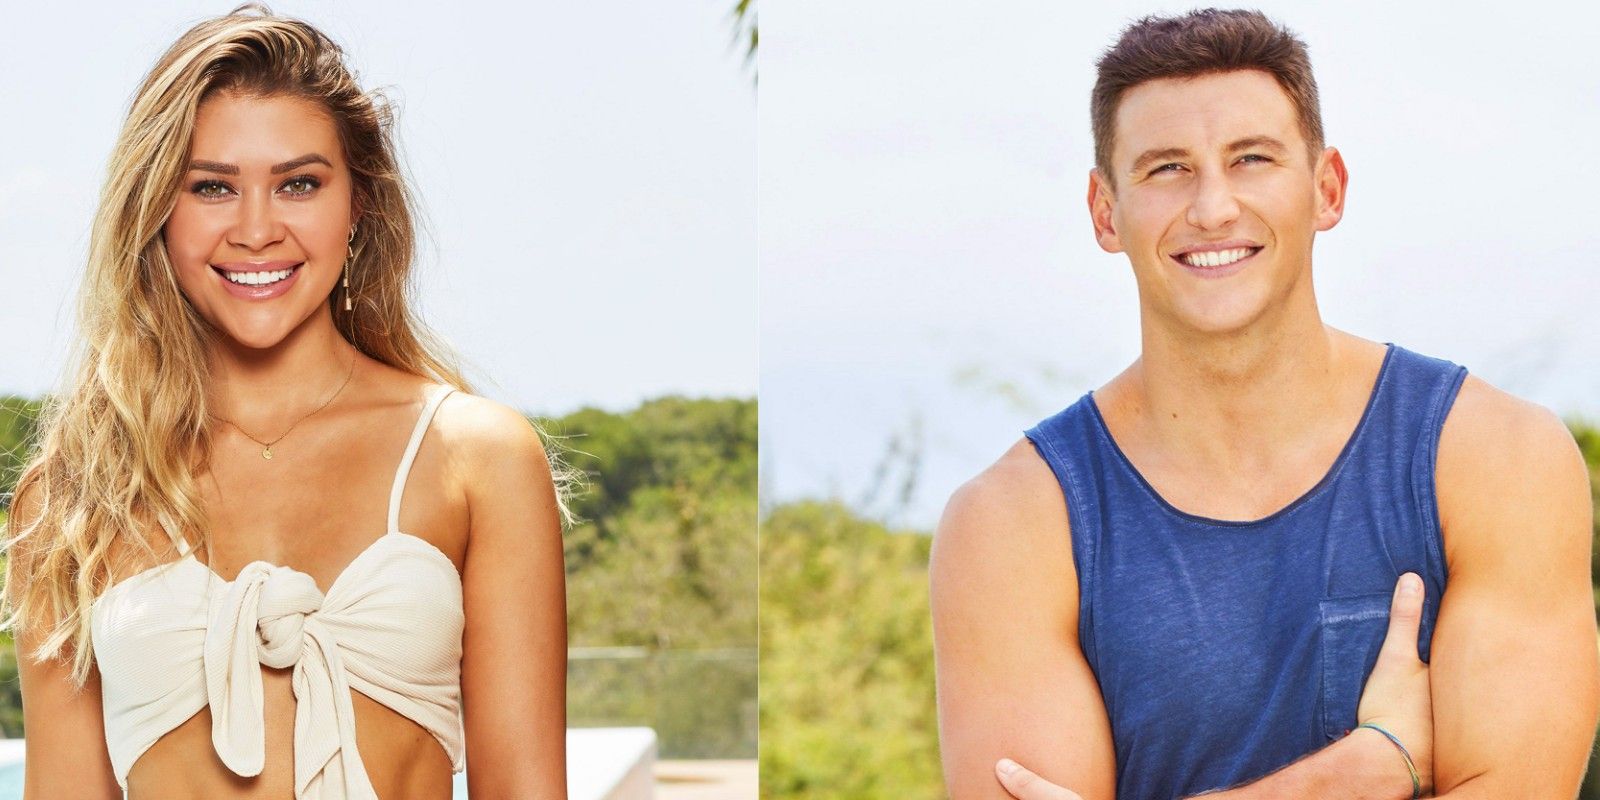 Bachelor In Paradise: Blake tries to clear his name, releasing texts with Caelynn.